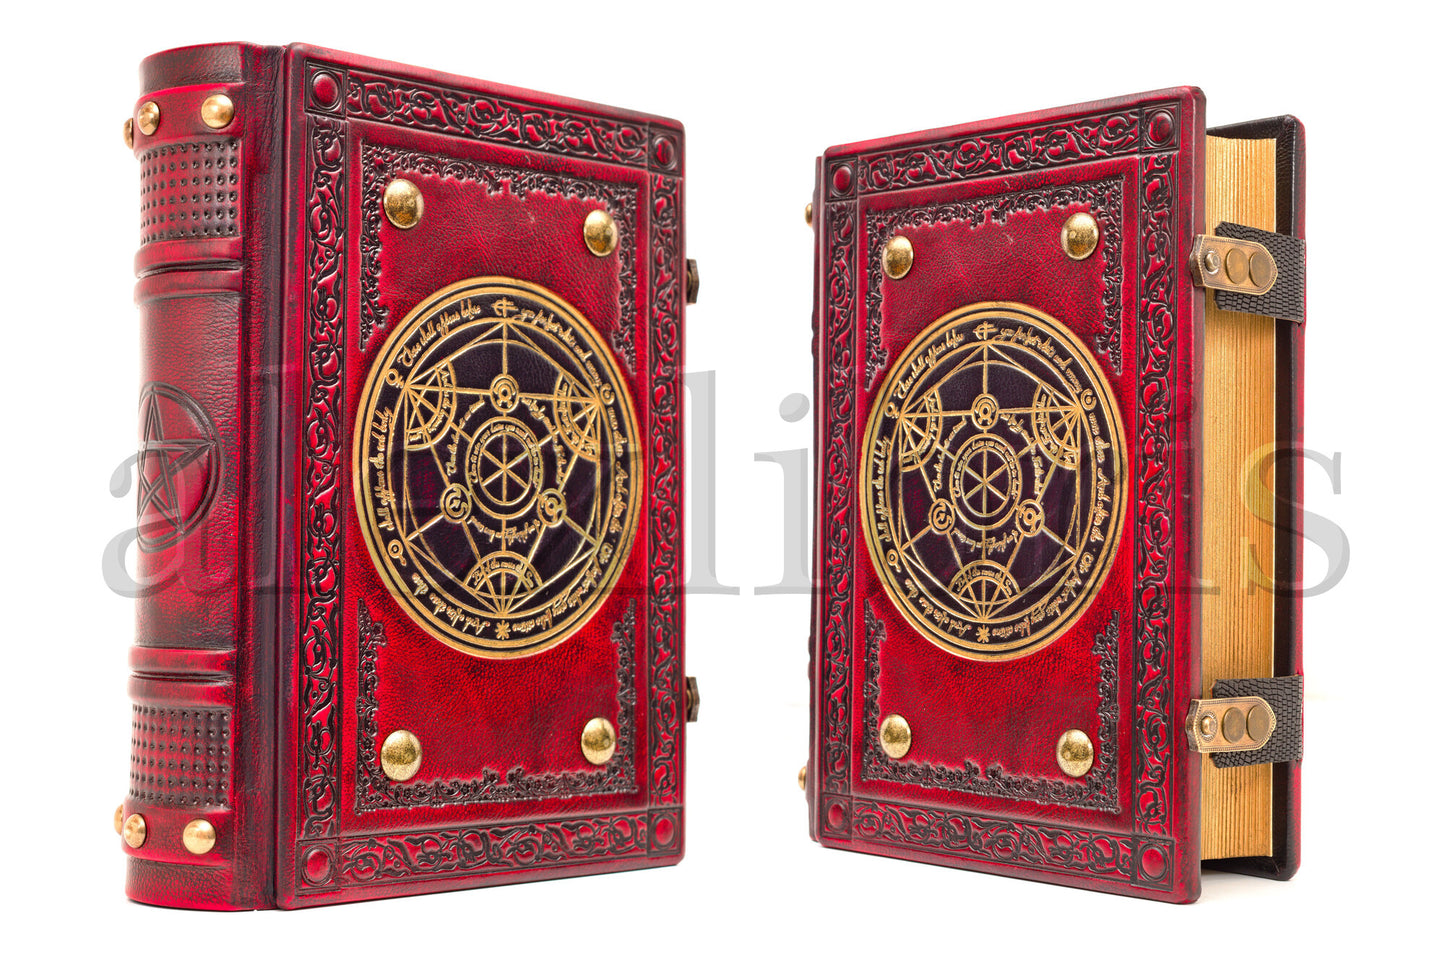 Alchemy Leather Journal: Large 7.5 x 10 Inches, 600 Blank Pages - Unleash Your Inner Alchemist with this Striking Red Leather Journal